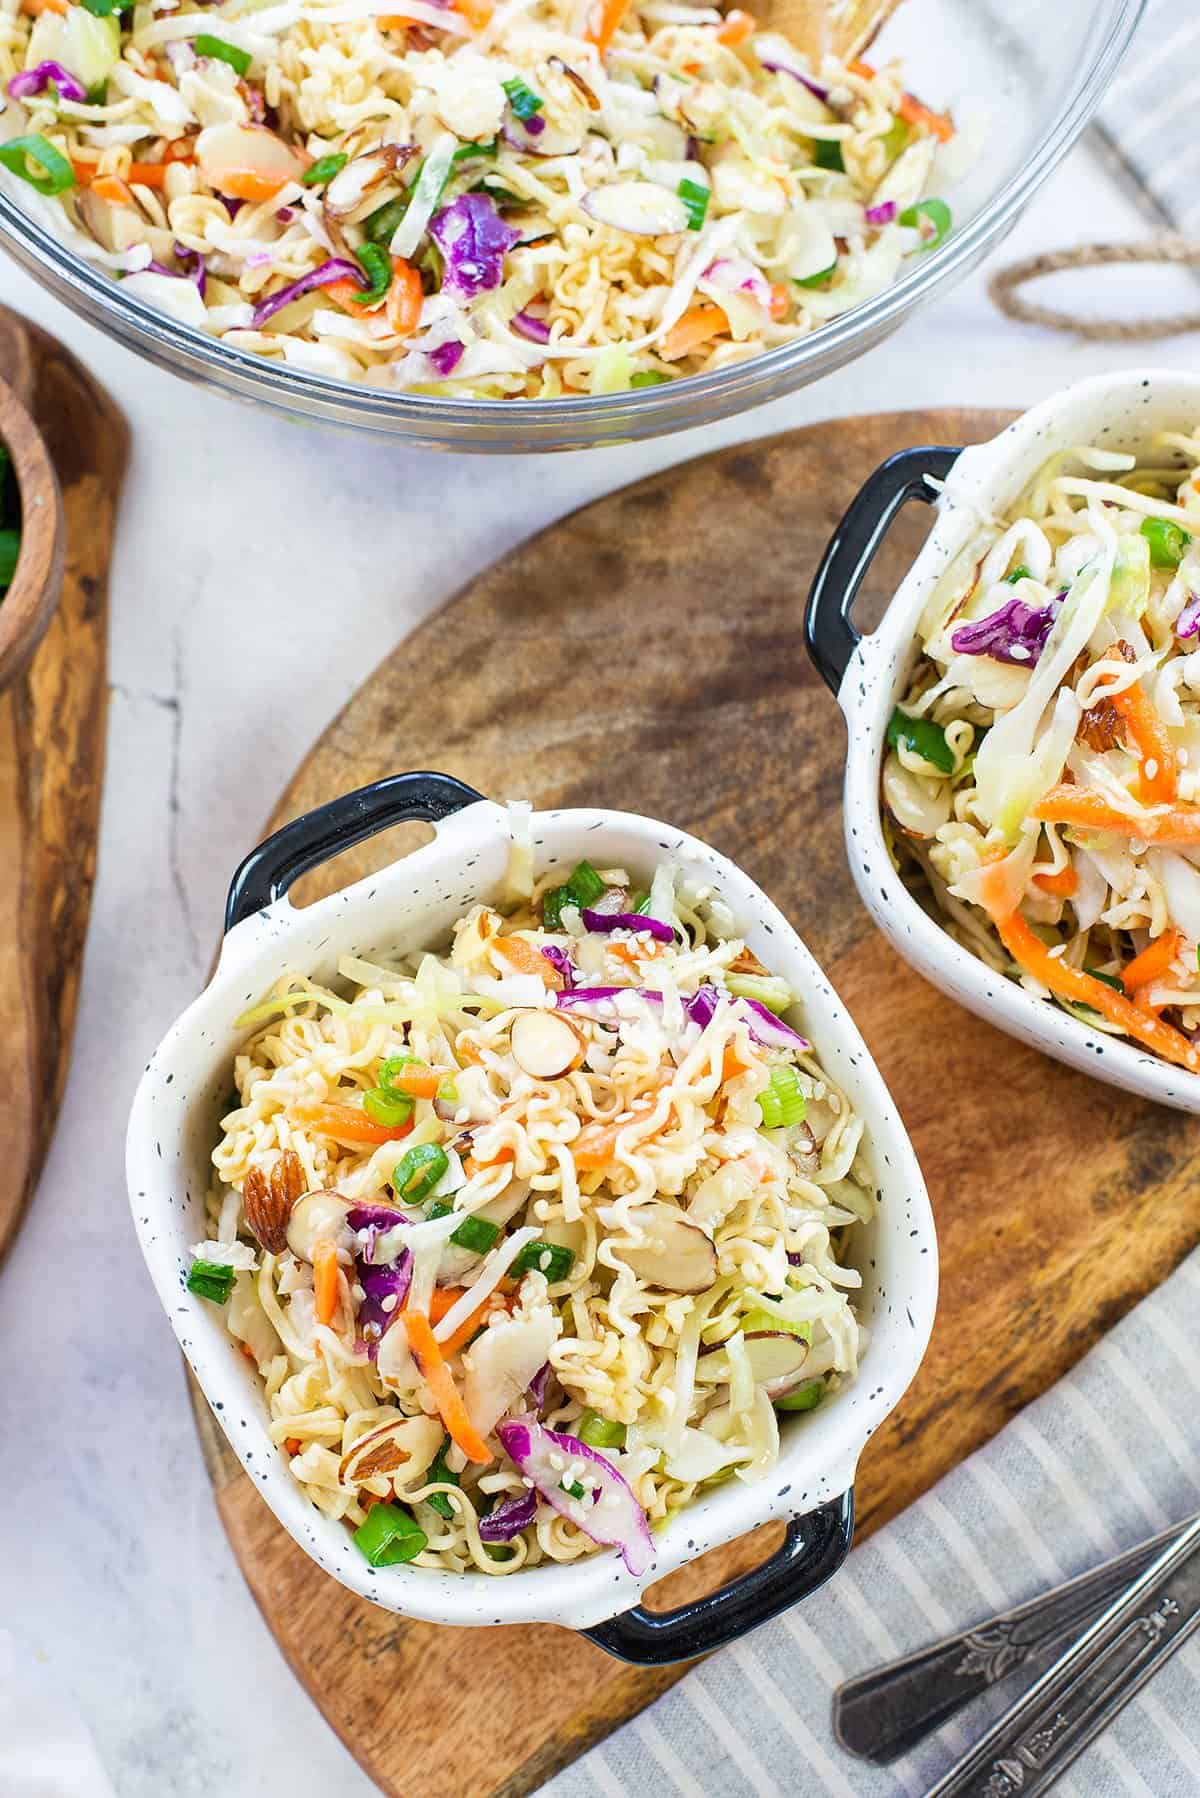 Two white bowls filled with colorful Asian-inspired ramen noodle salad made of shredded cabbage, carrots, scallions, and ramen noodles, garnished with sesame seeds, on a white marble surface